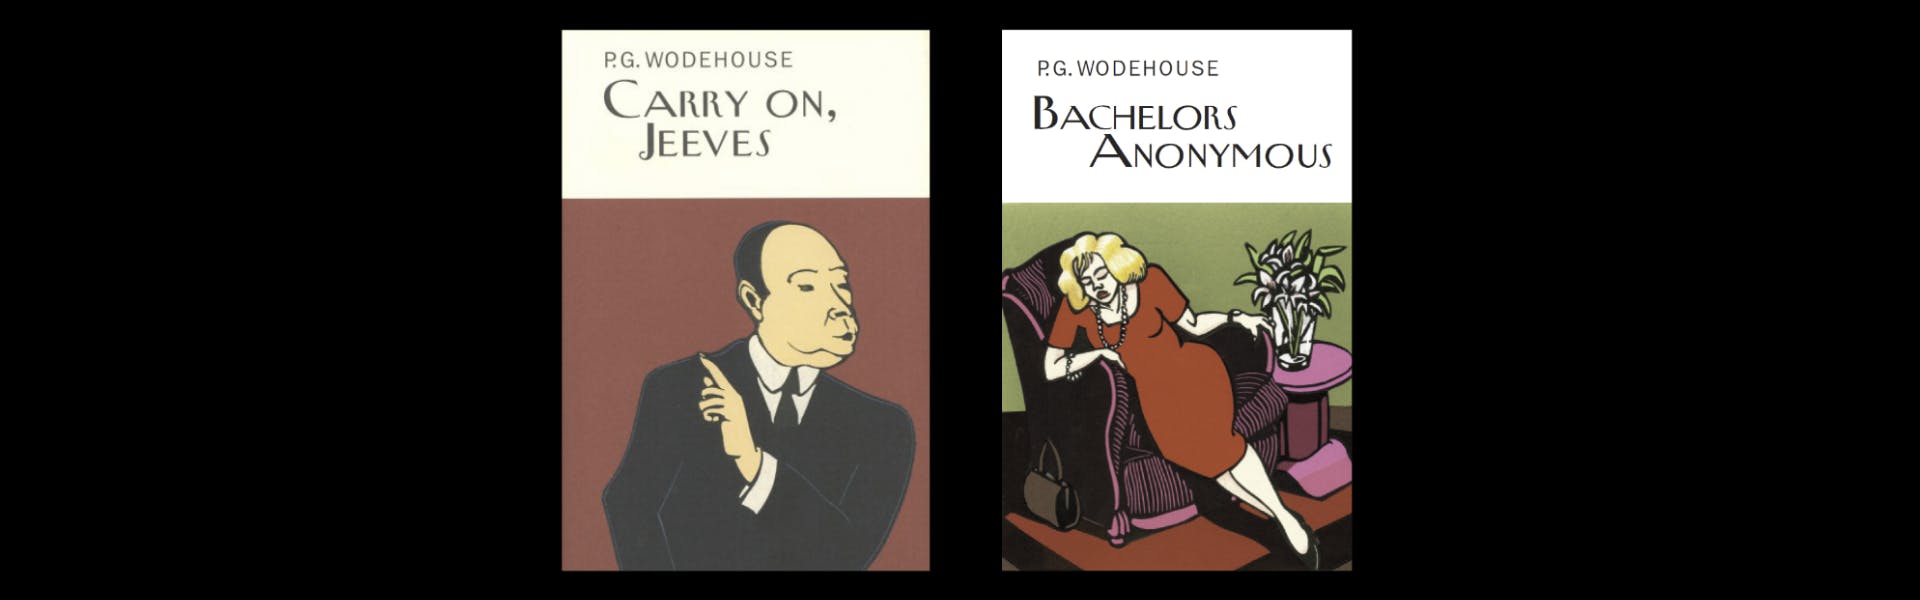 Carry on Jeeves and Bachelors Anonymous, cover design by Andrzej Klimowski and Danusia Schejbal